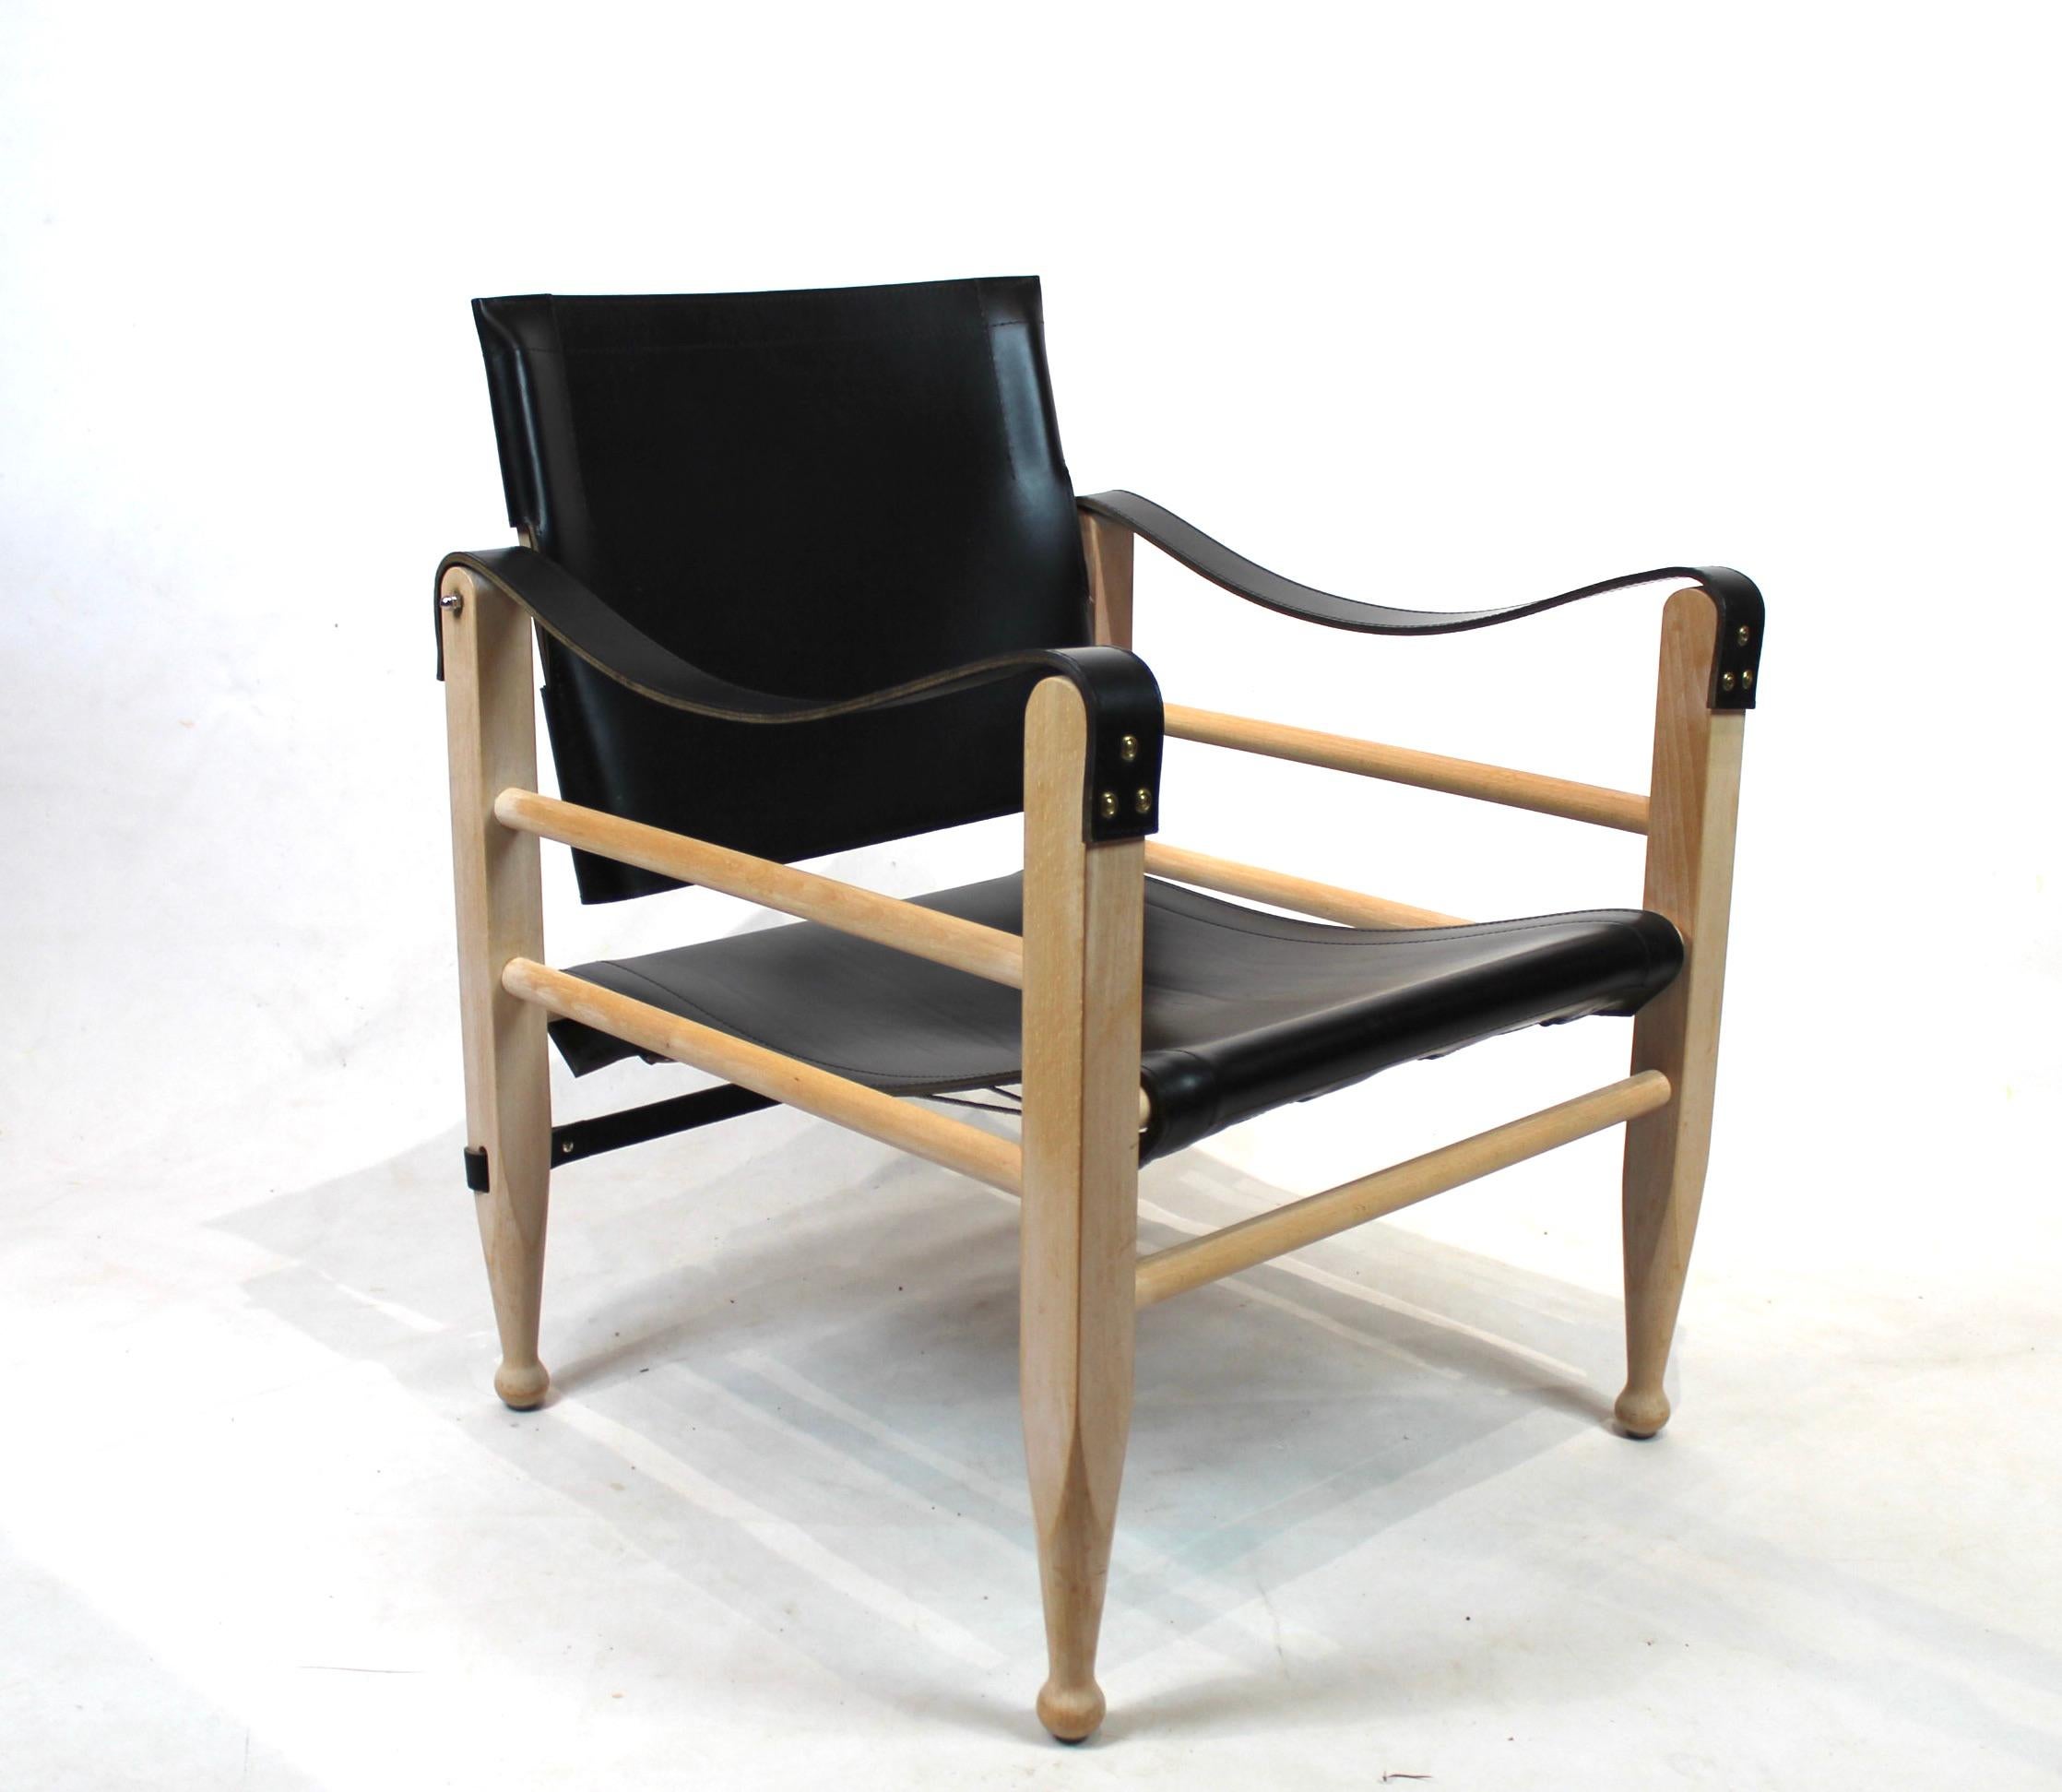 A pair of safari chairs by Aage Bruun & Son of black leather and soap treated beech from the 1960s. The chairs are in great vintage condition.